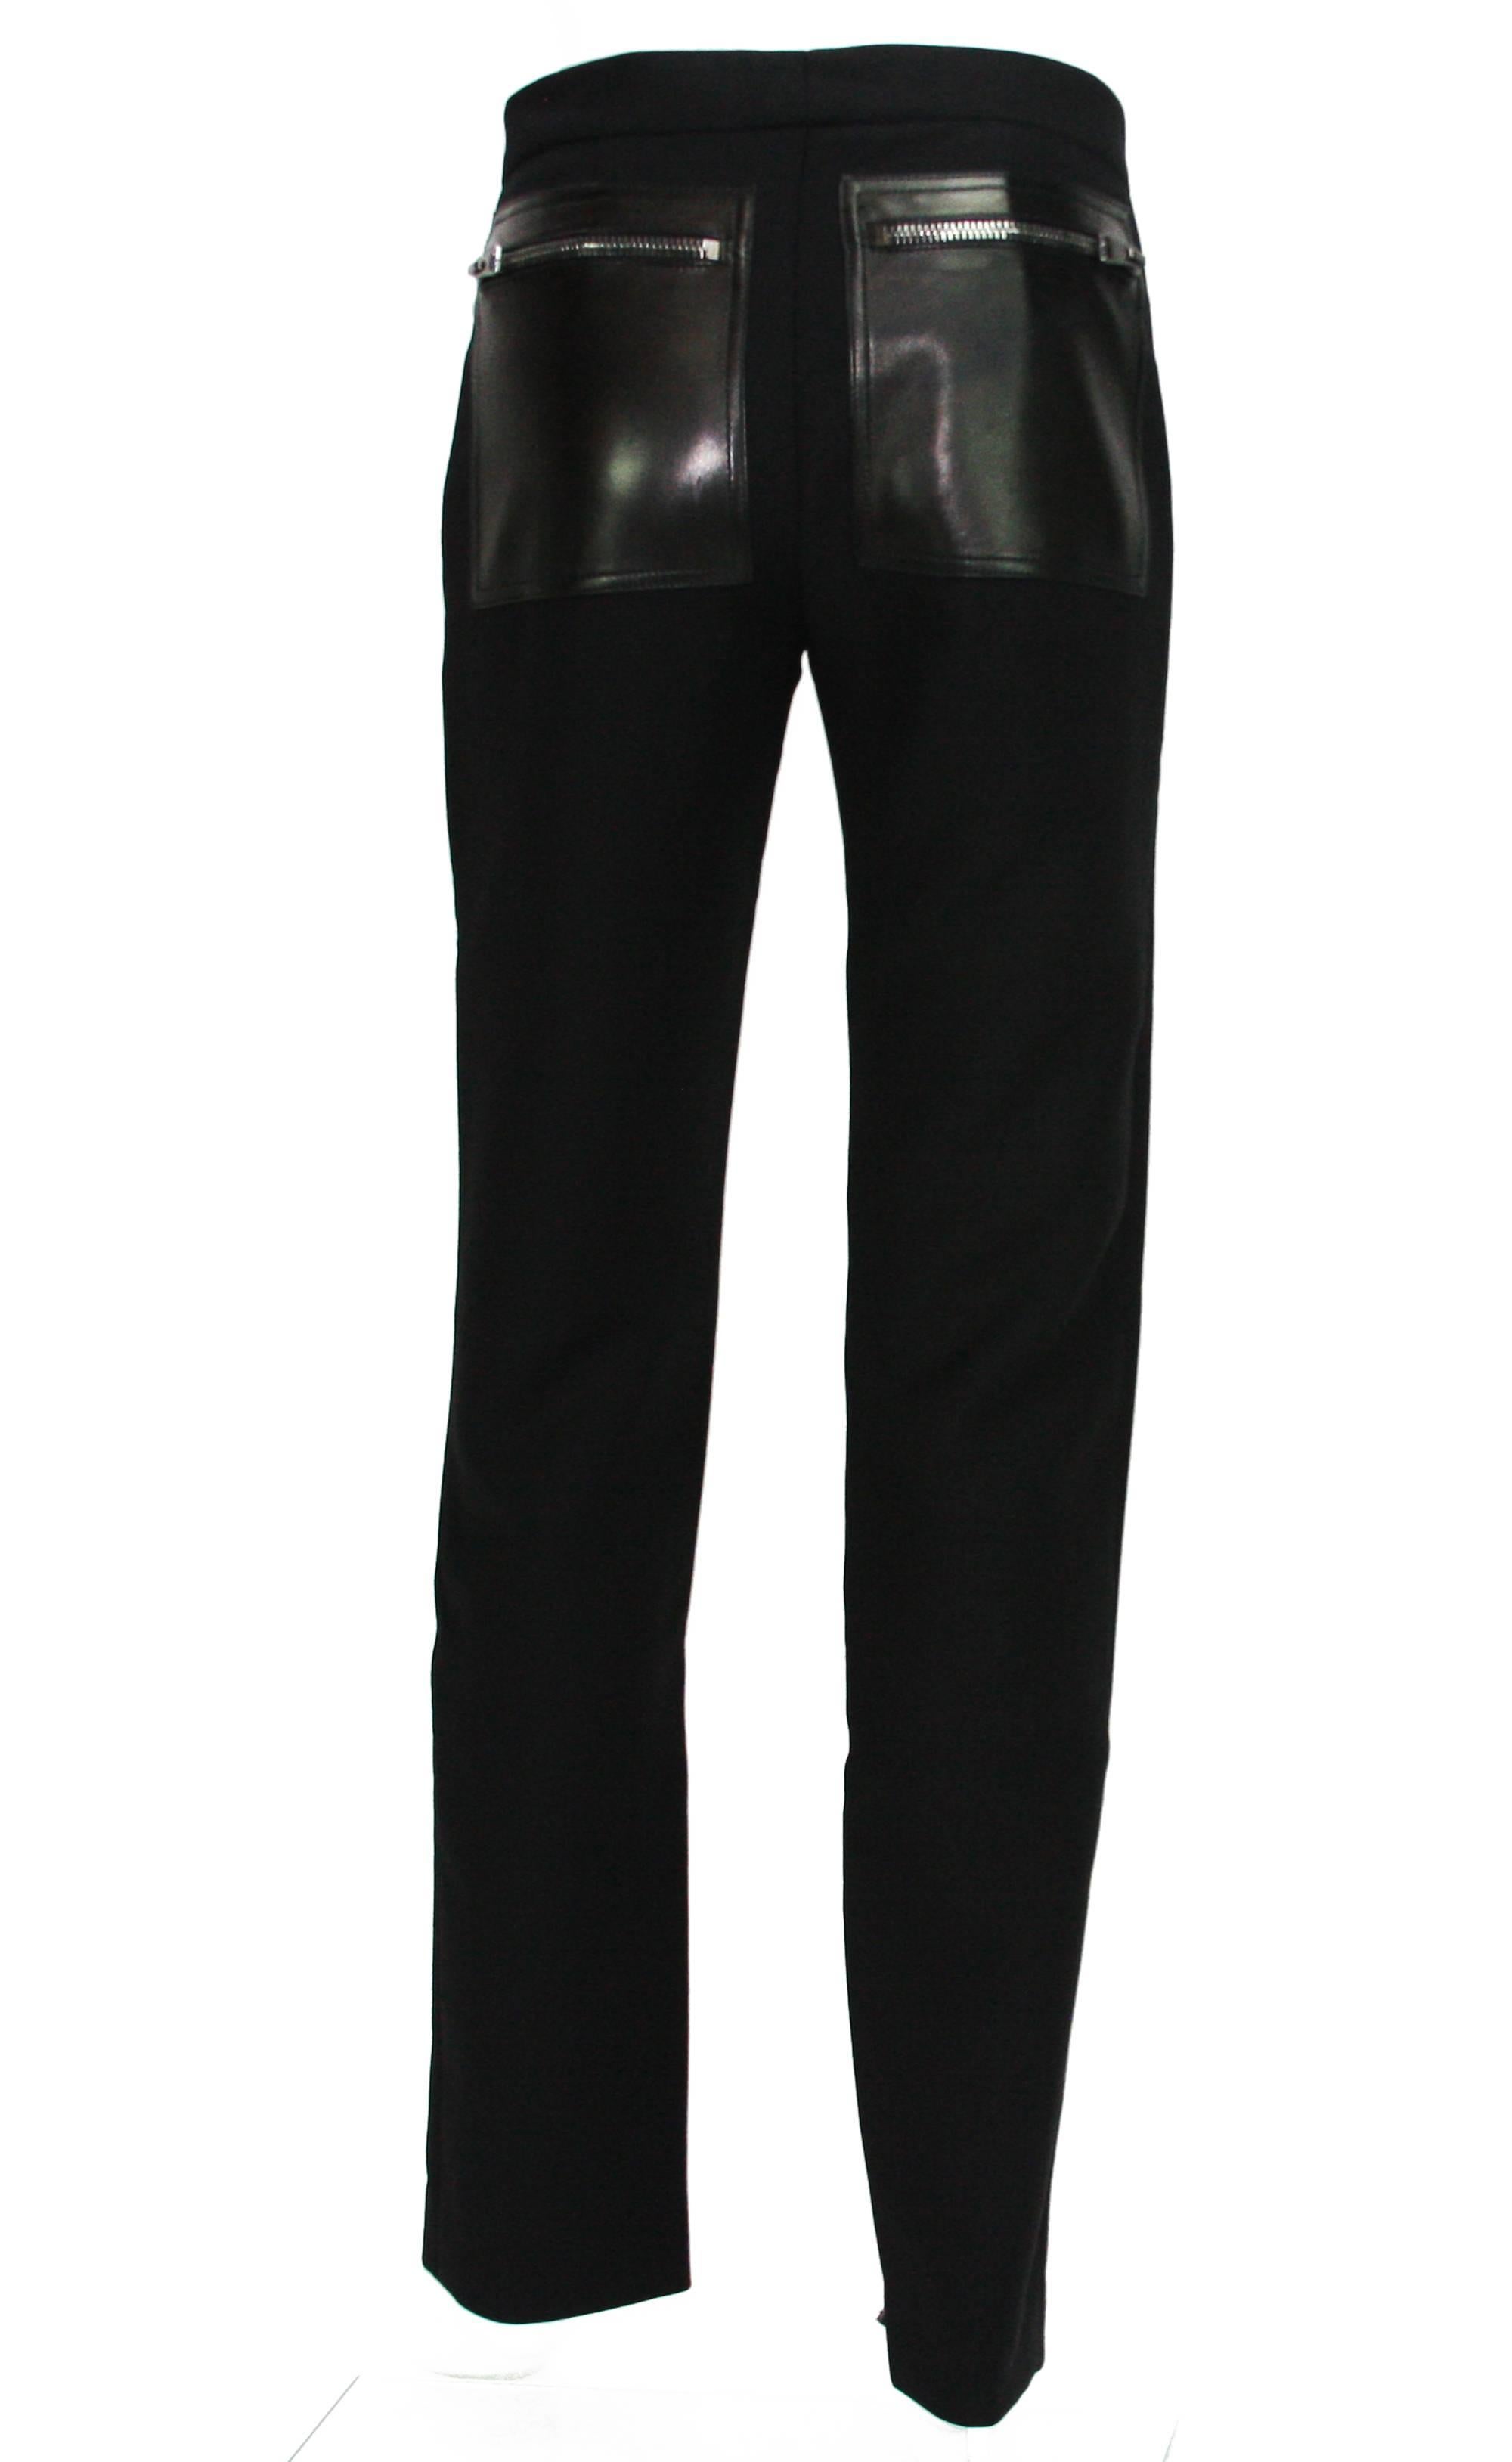 Black Tom Ford for Gucci F/W 2001 Zipper Leather Pants